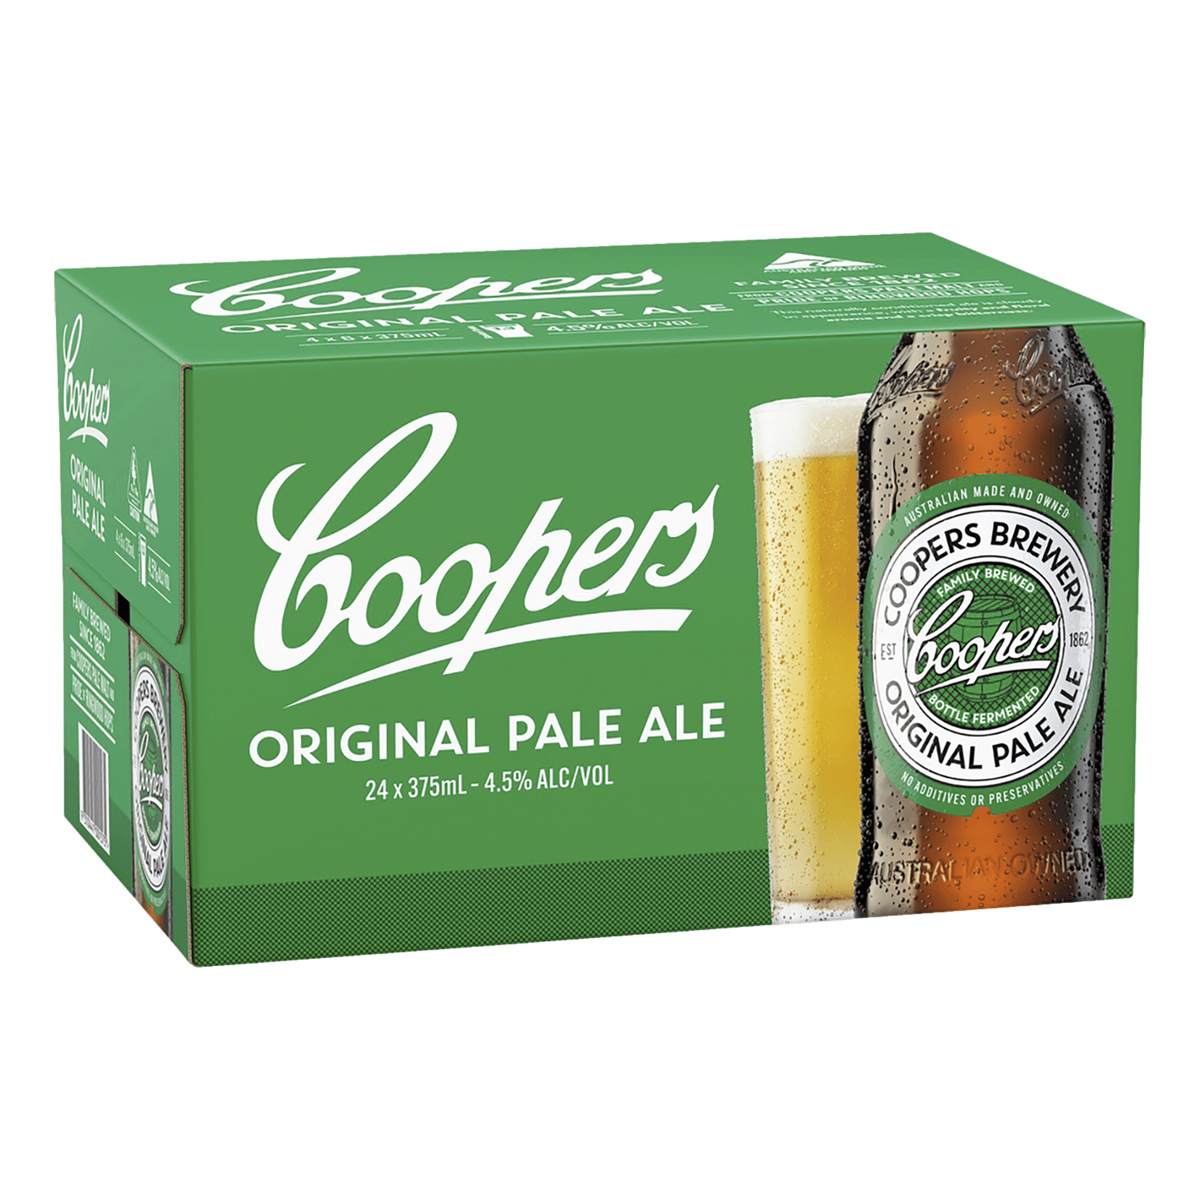 Coopers Pale Ale 375ml Bottle Case of 24